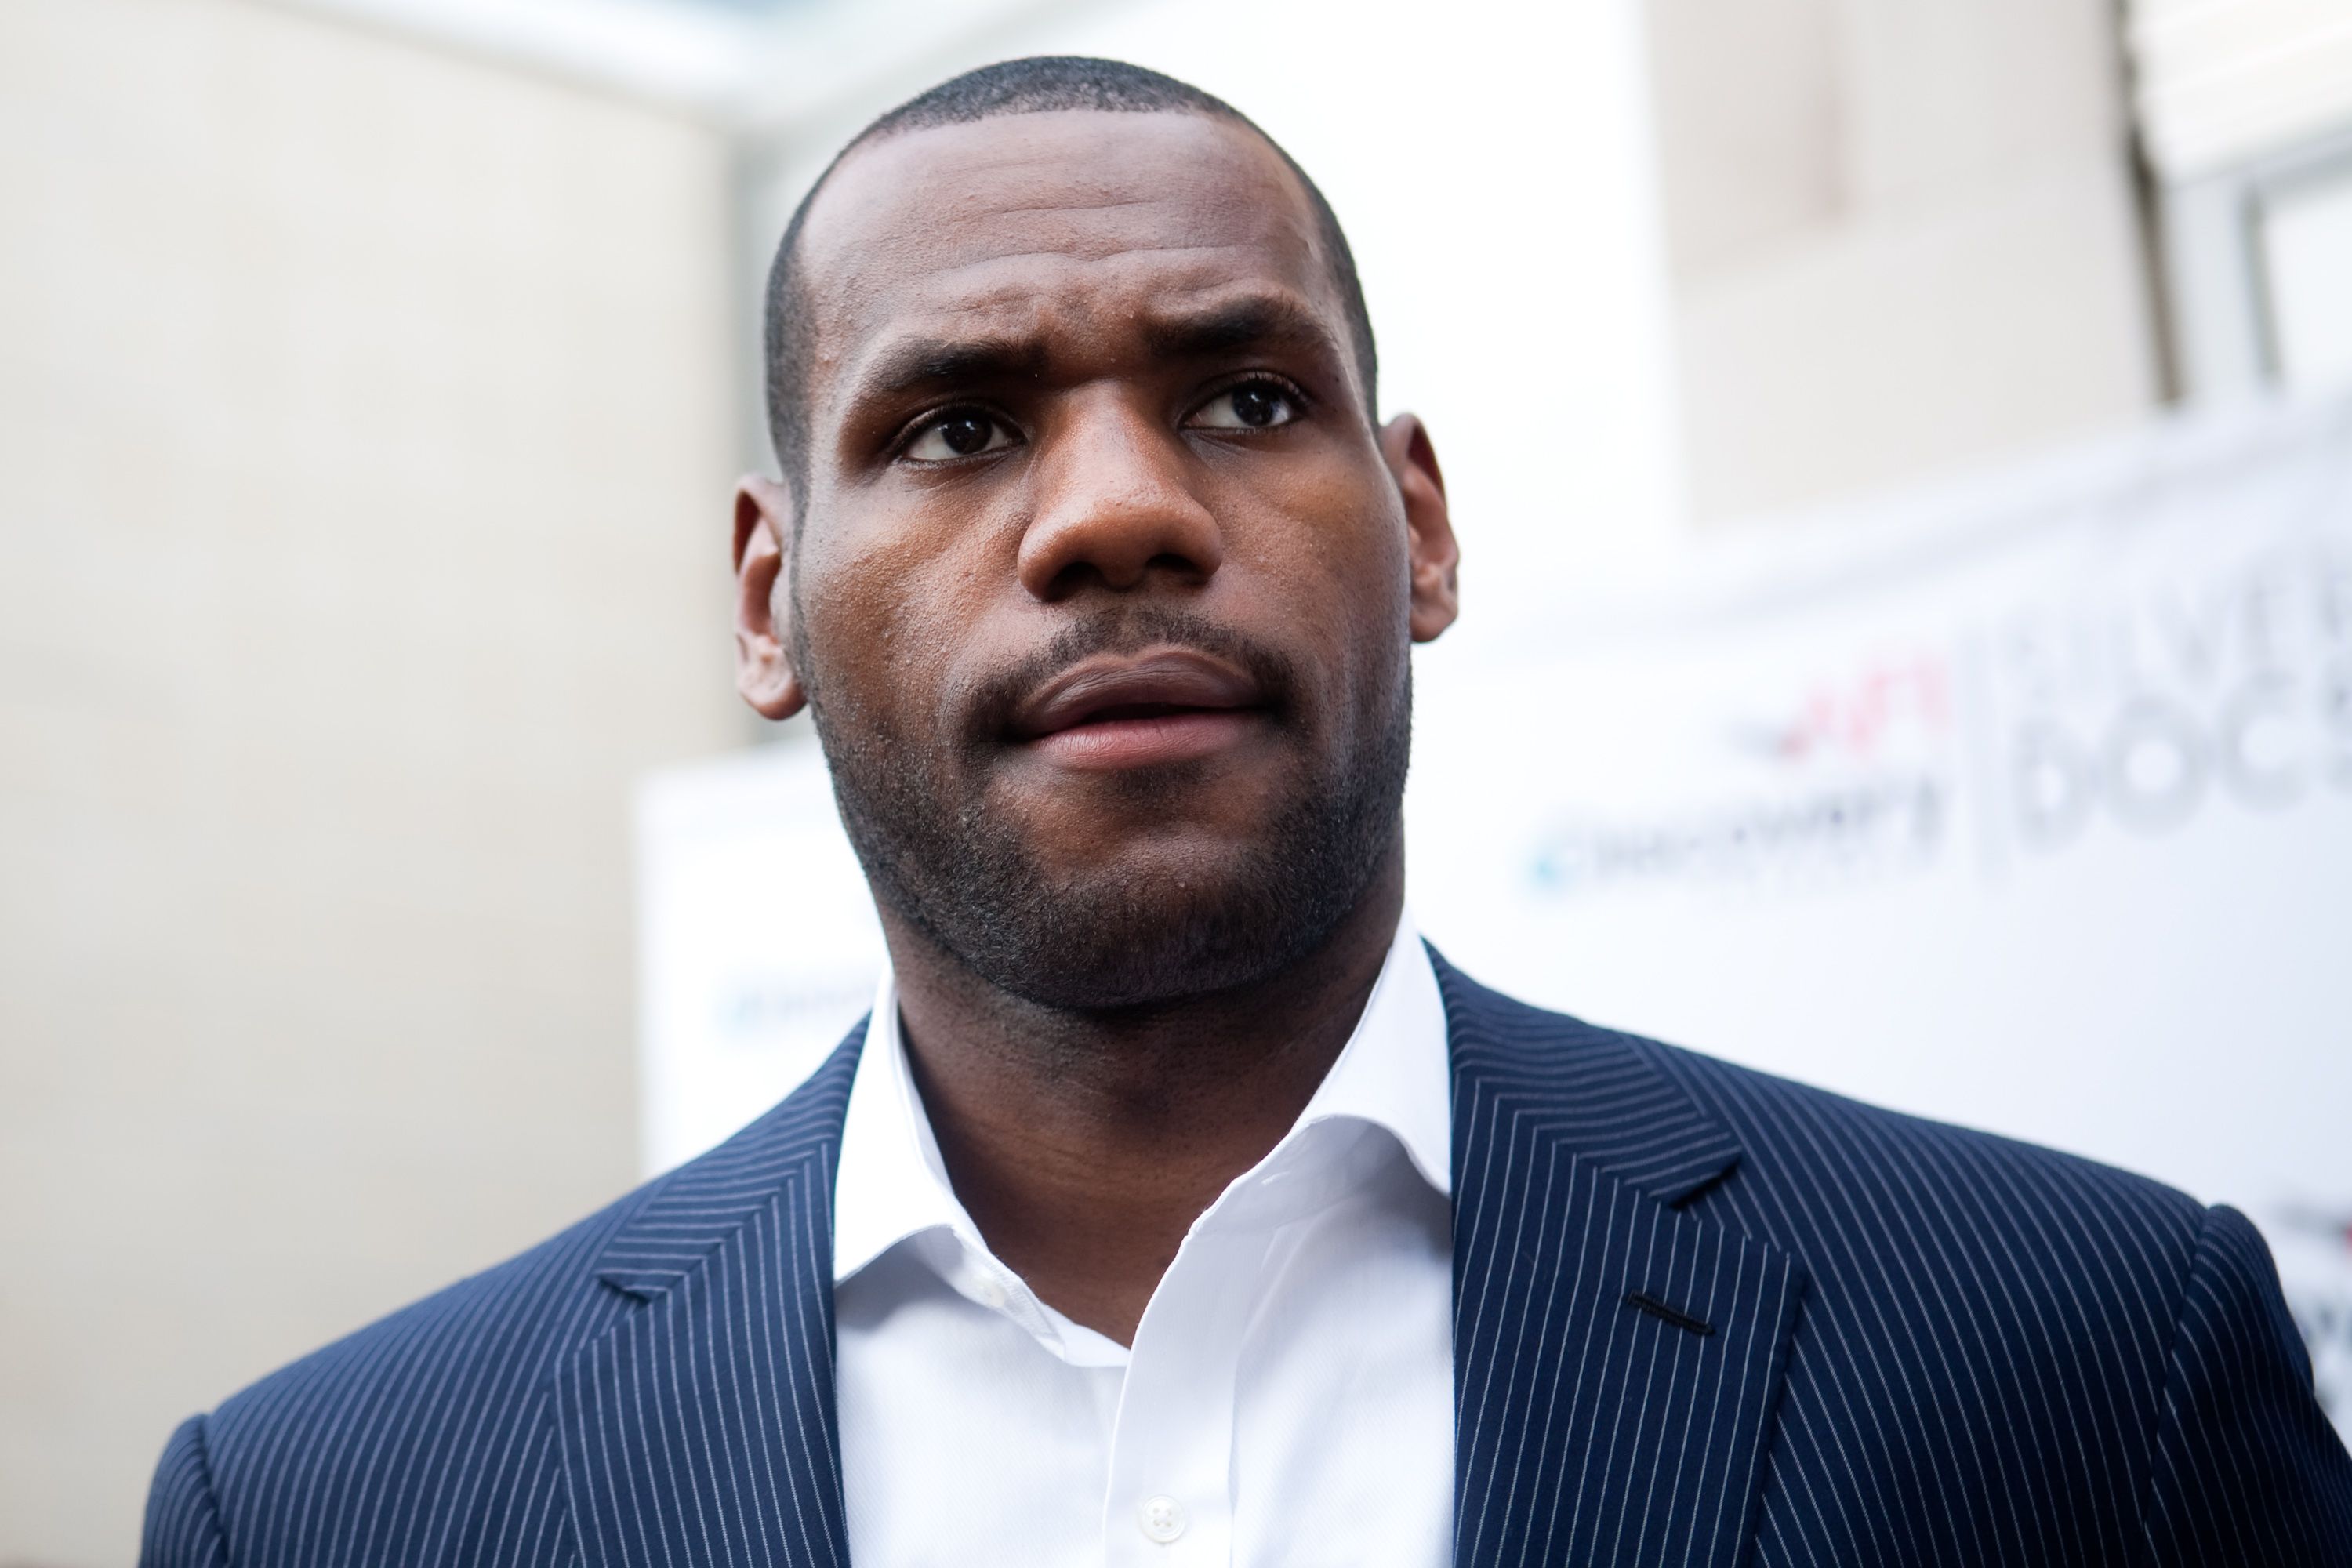 LeBron James at the US premiere of the feature film "More Than A Game" in Silver Spring on June 15, 2009. | Photo: Getty Images